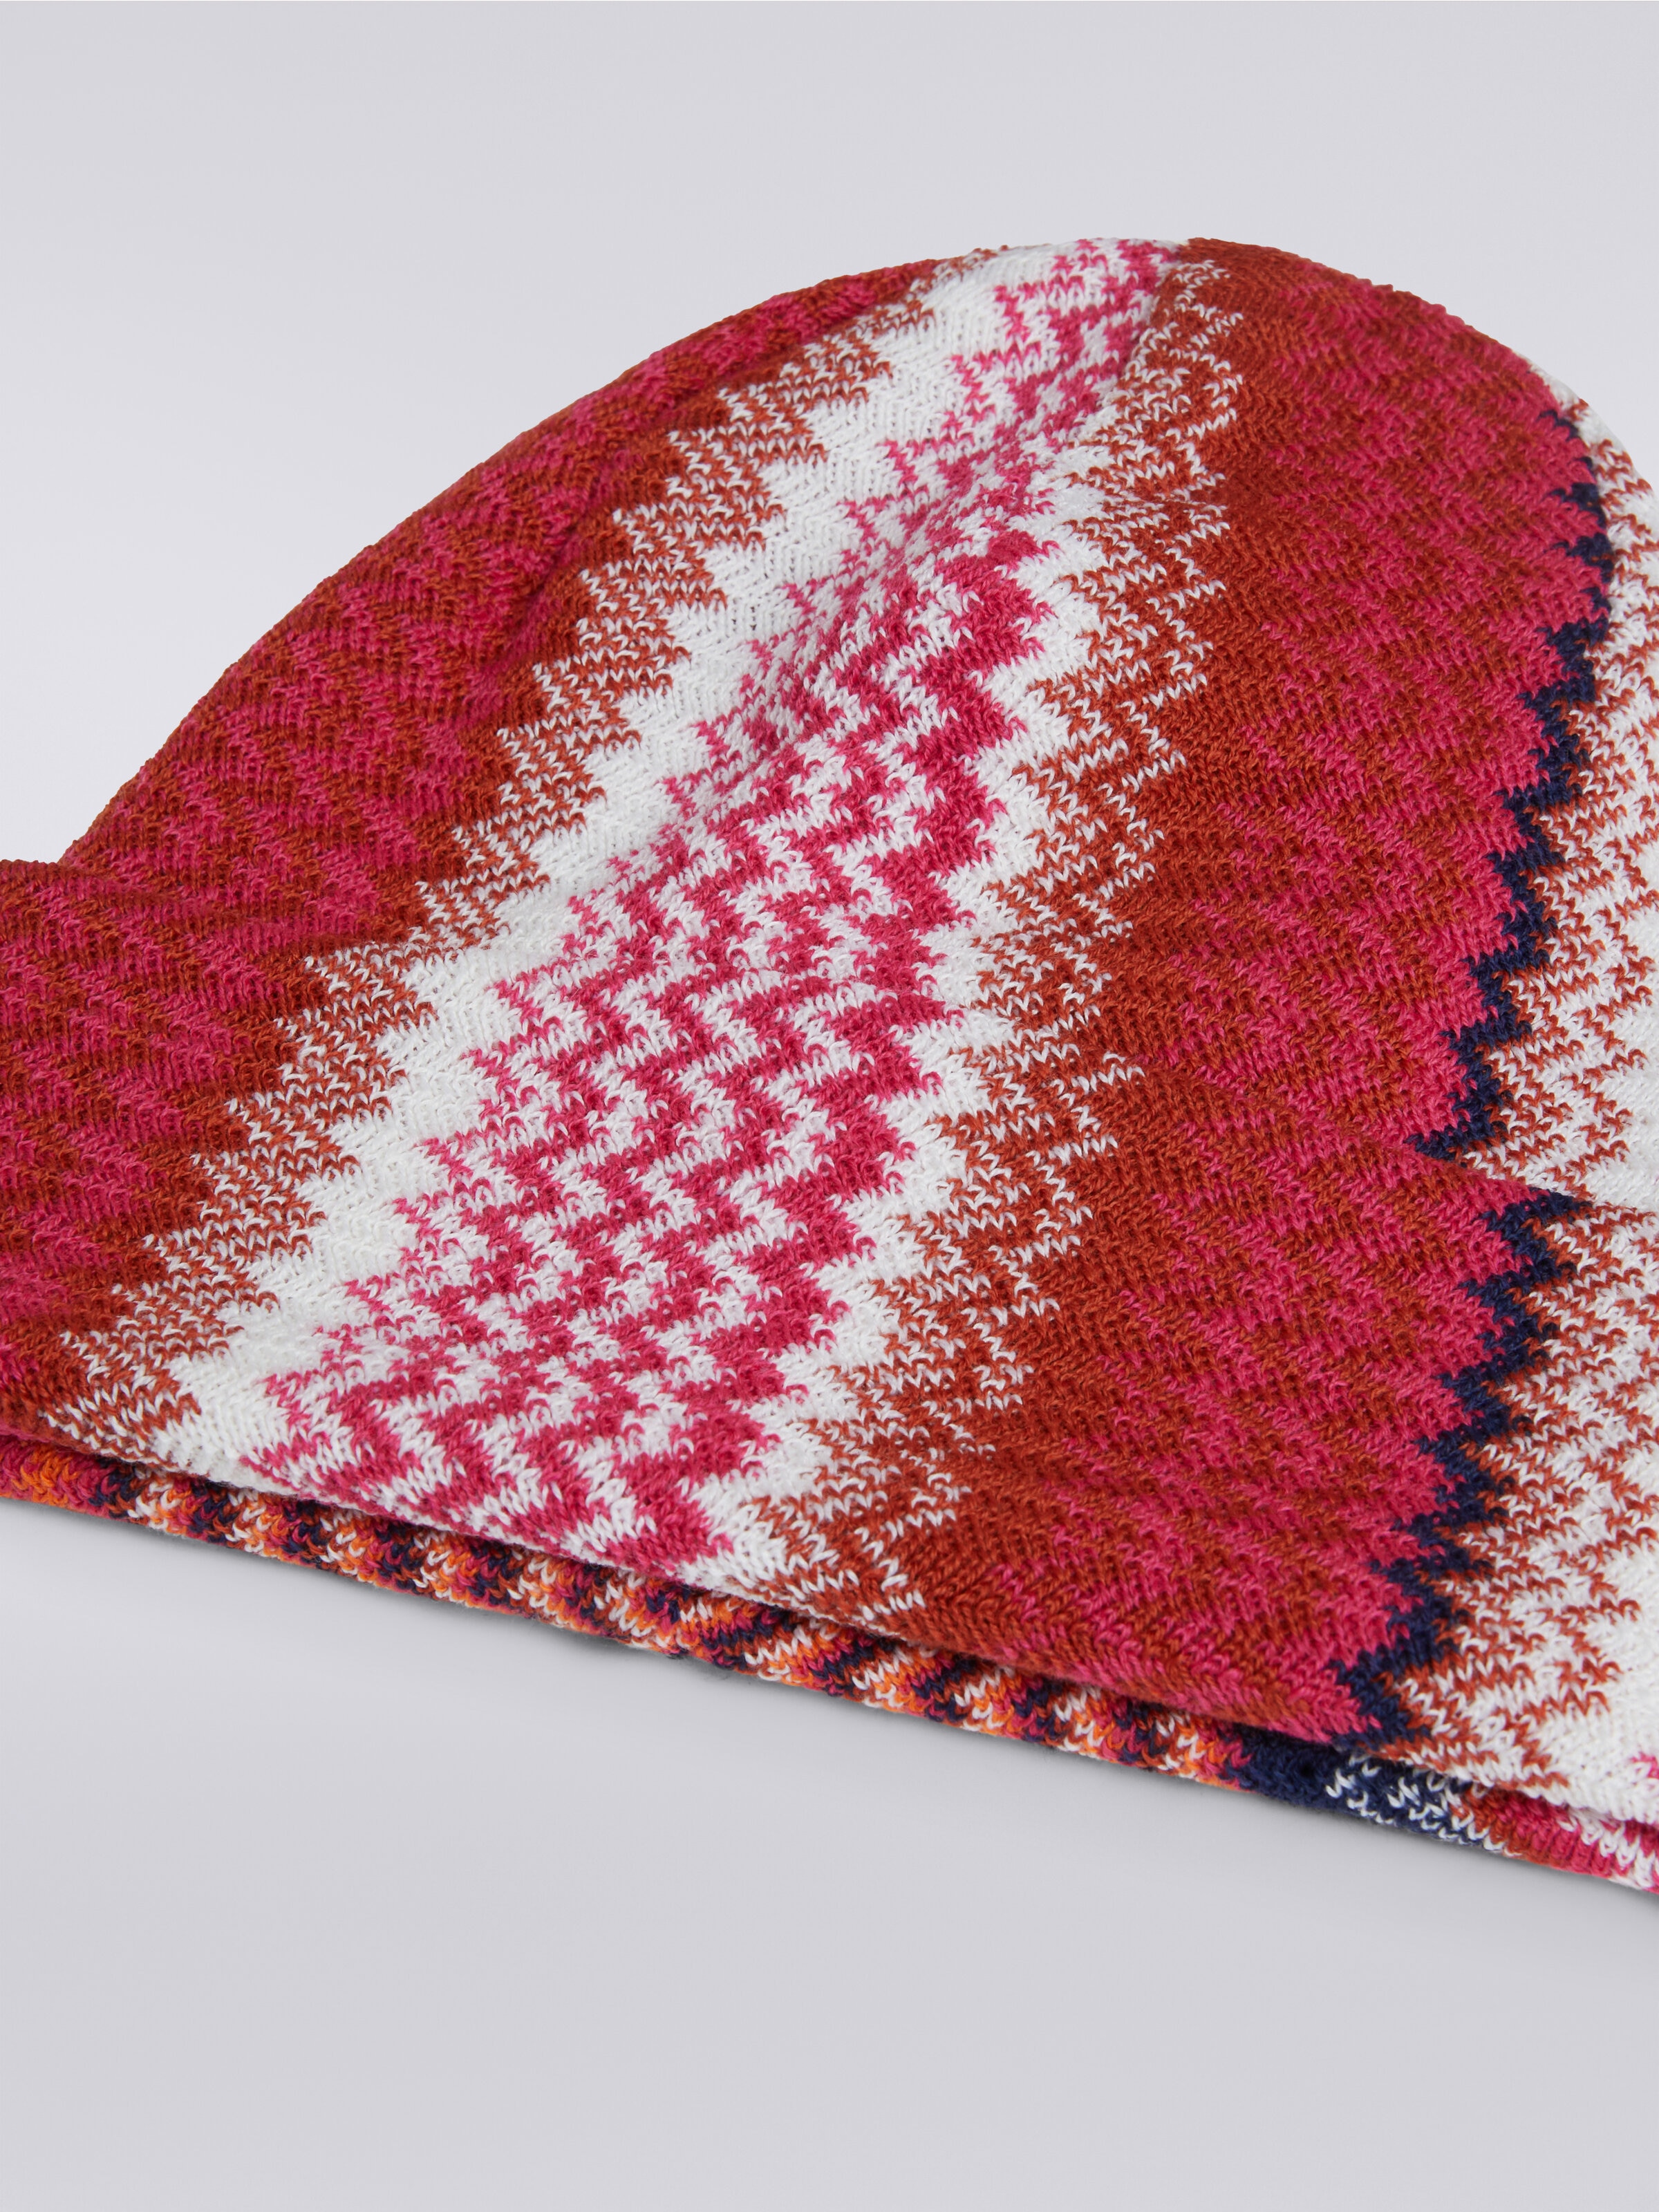 Wool blend hat with zigzag pattern, Multicoloured  - 1